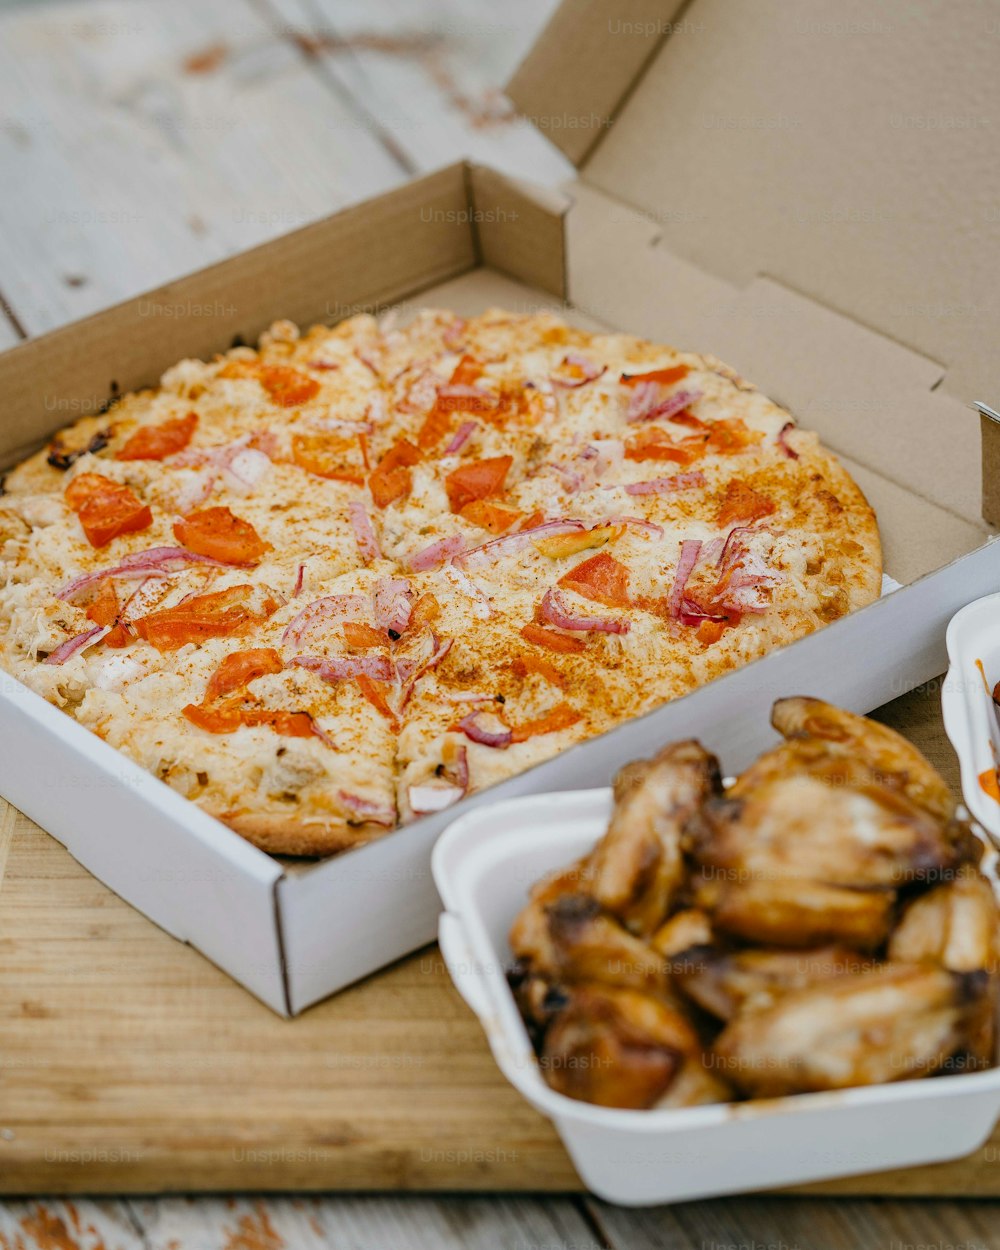 a box of chicken wings and a box of pizza